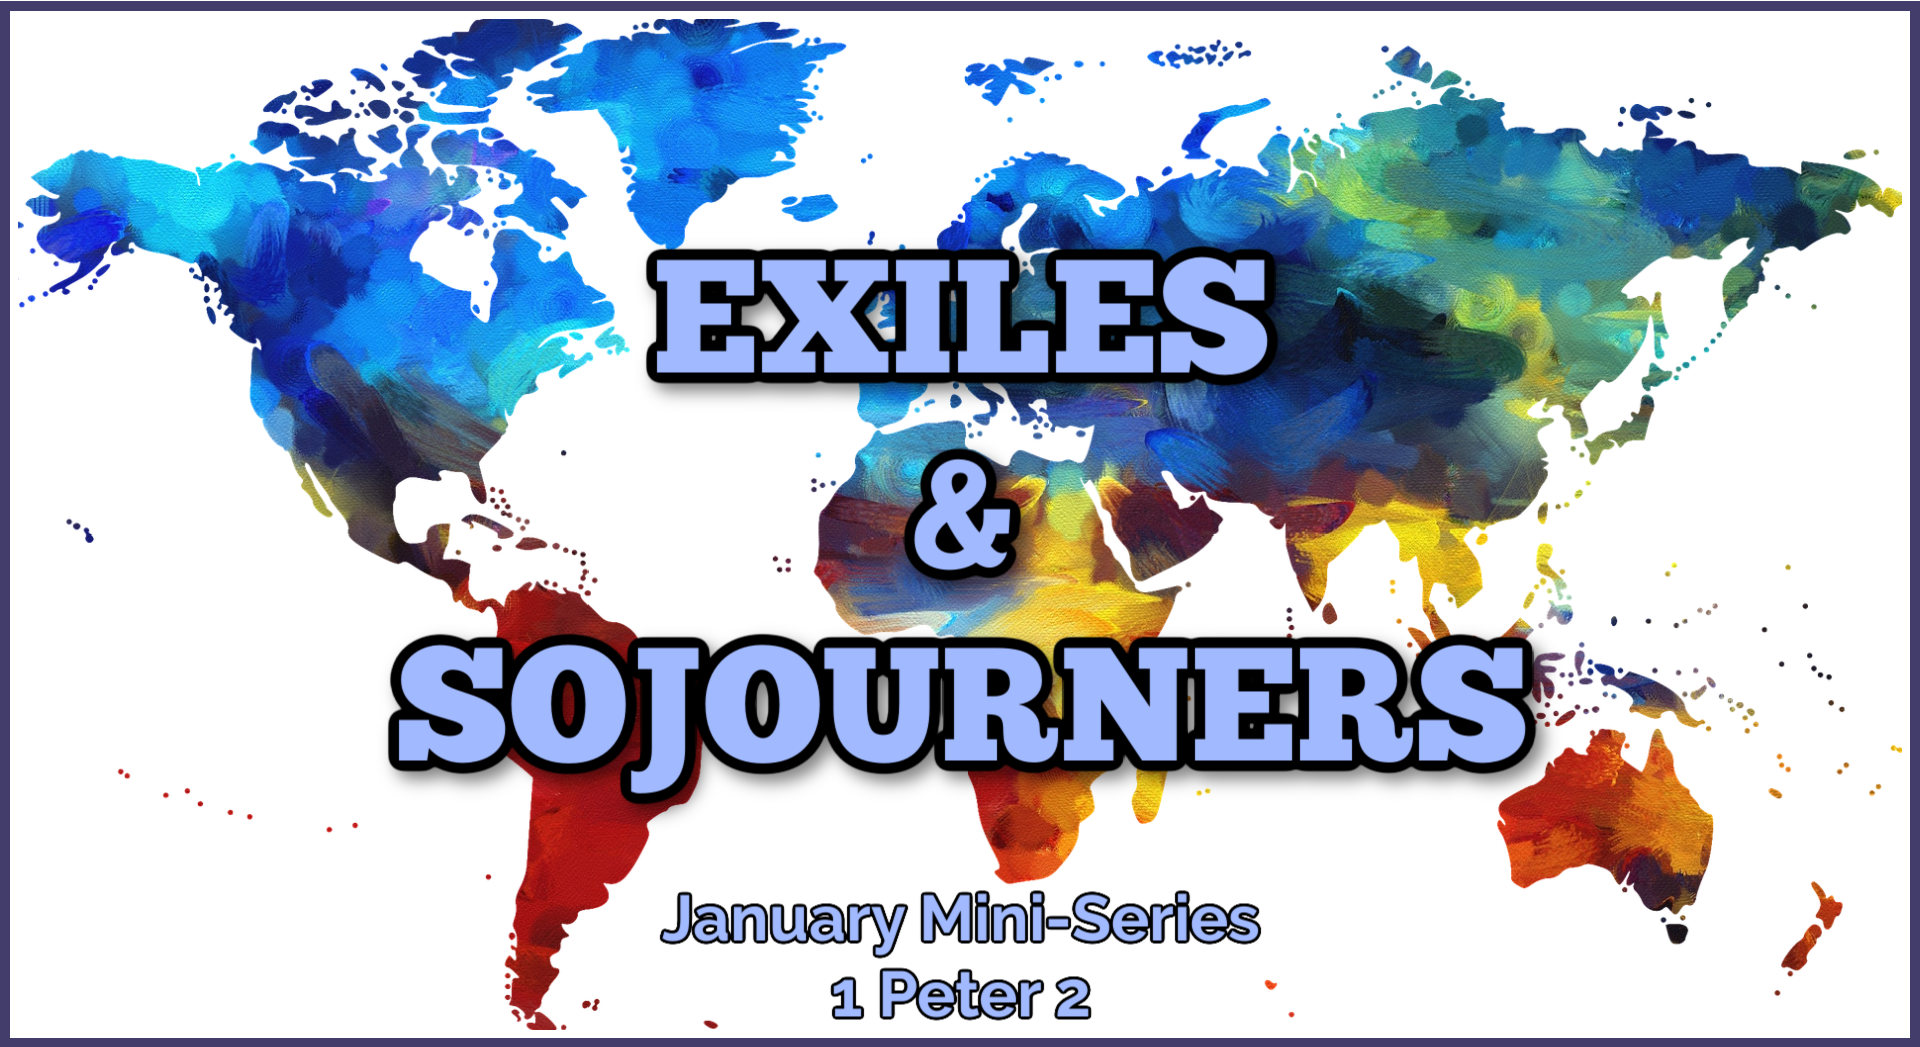 Exiles and Sojourners